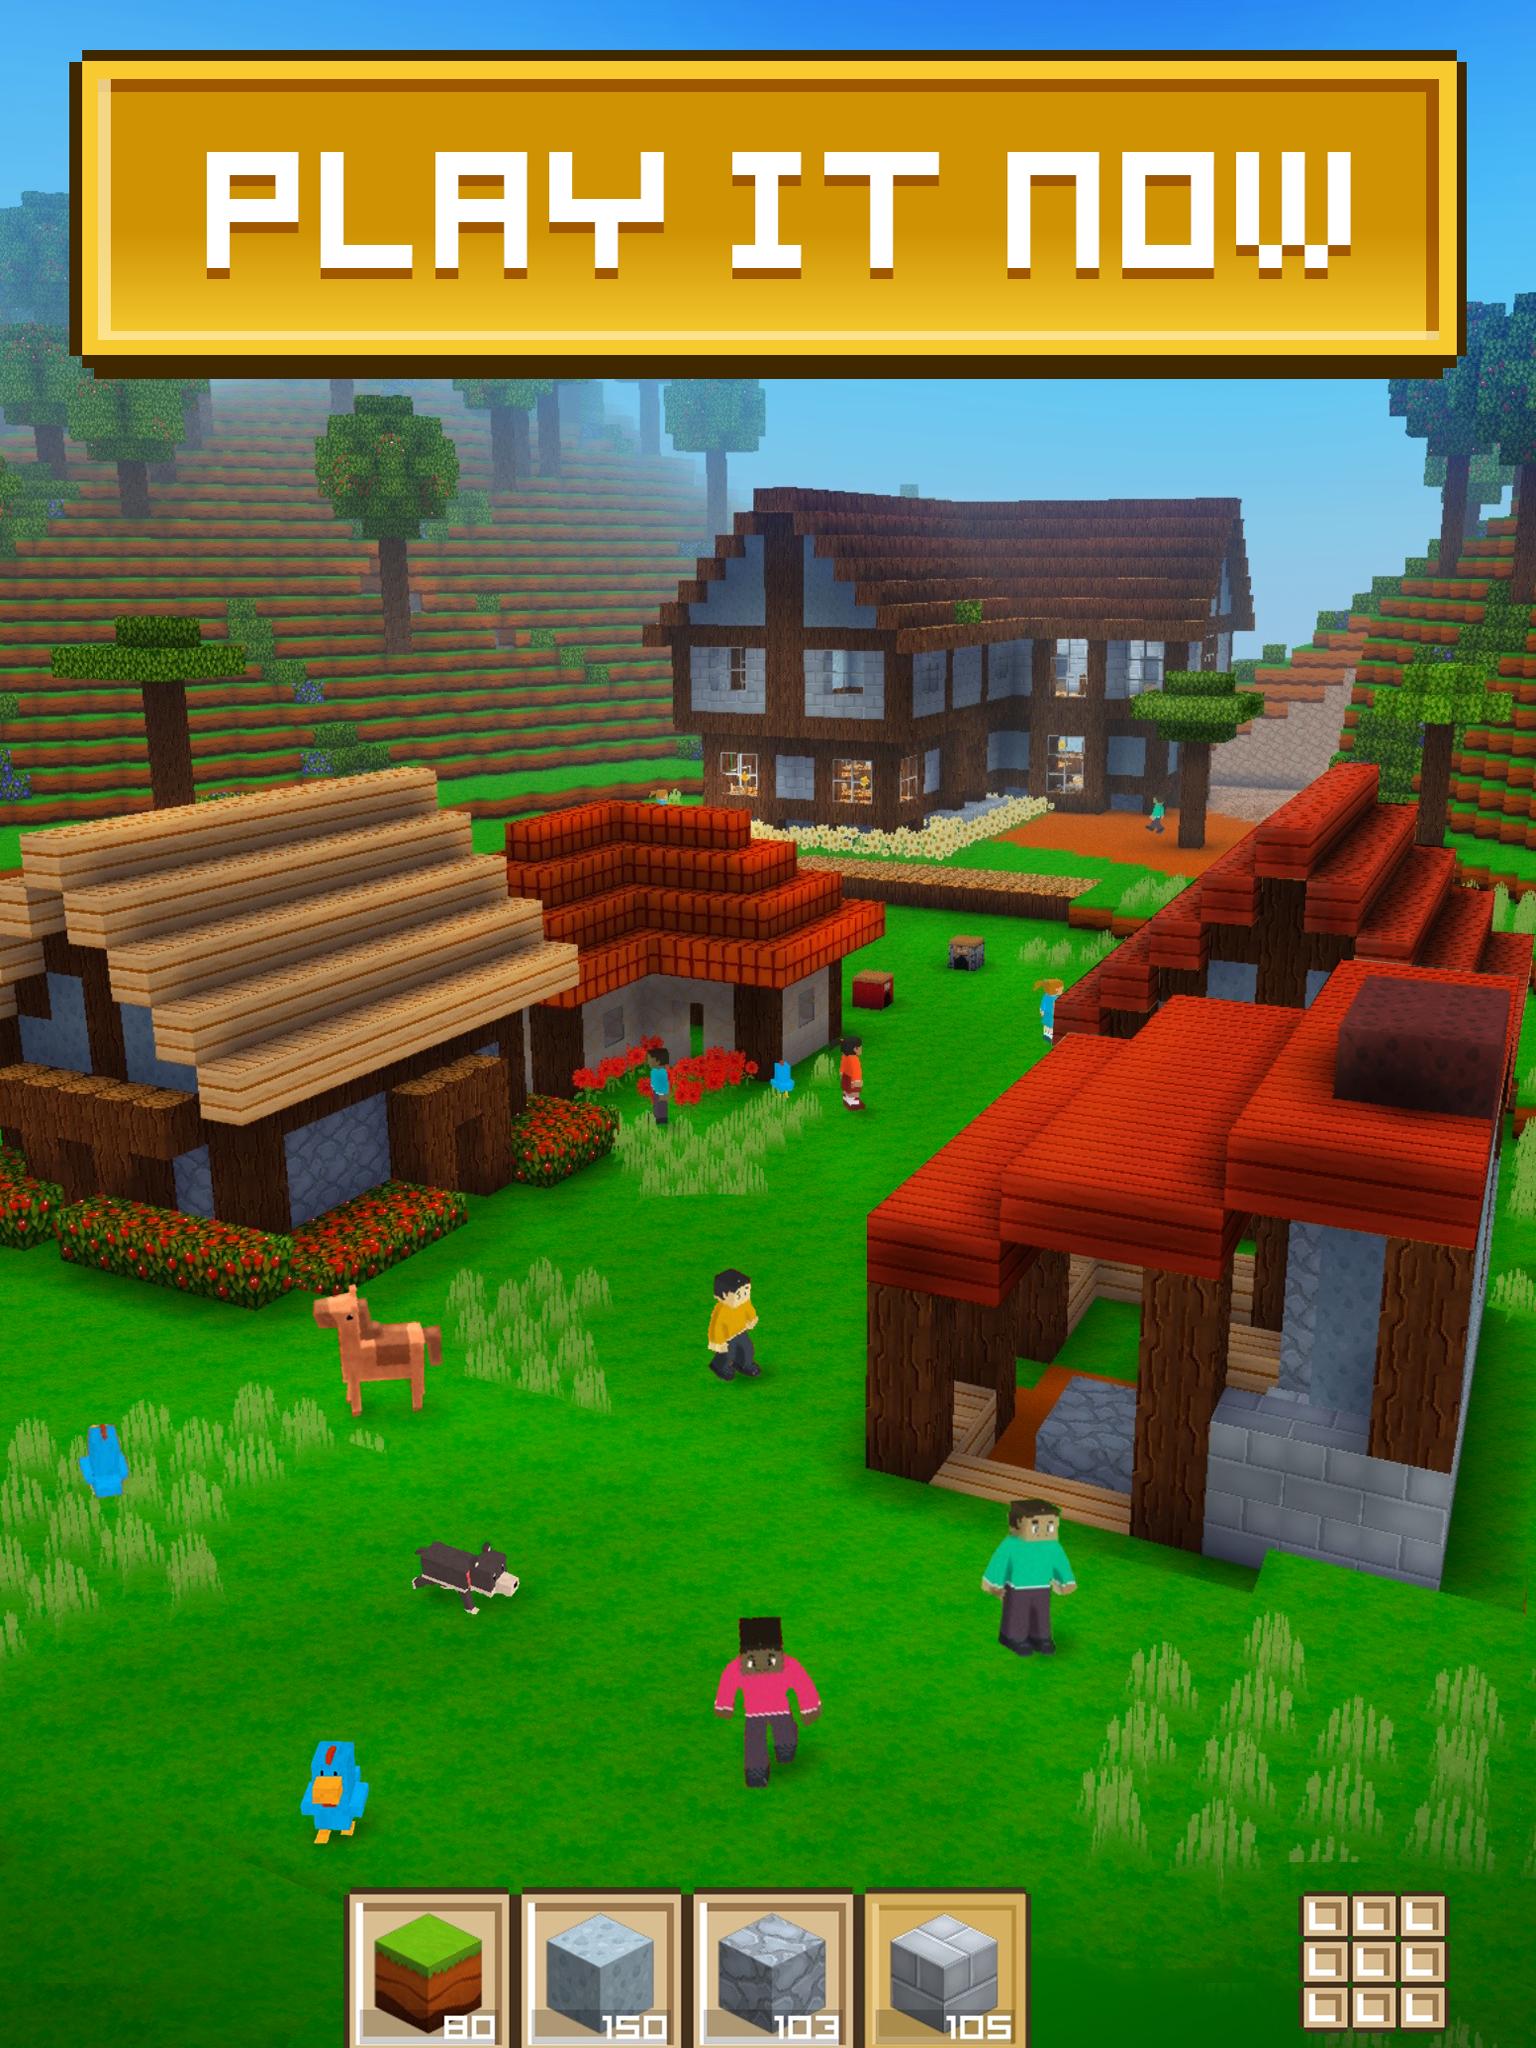 Block Craft 3D for Android - APK Download